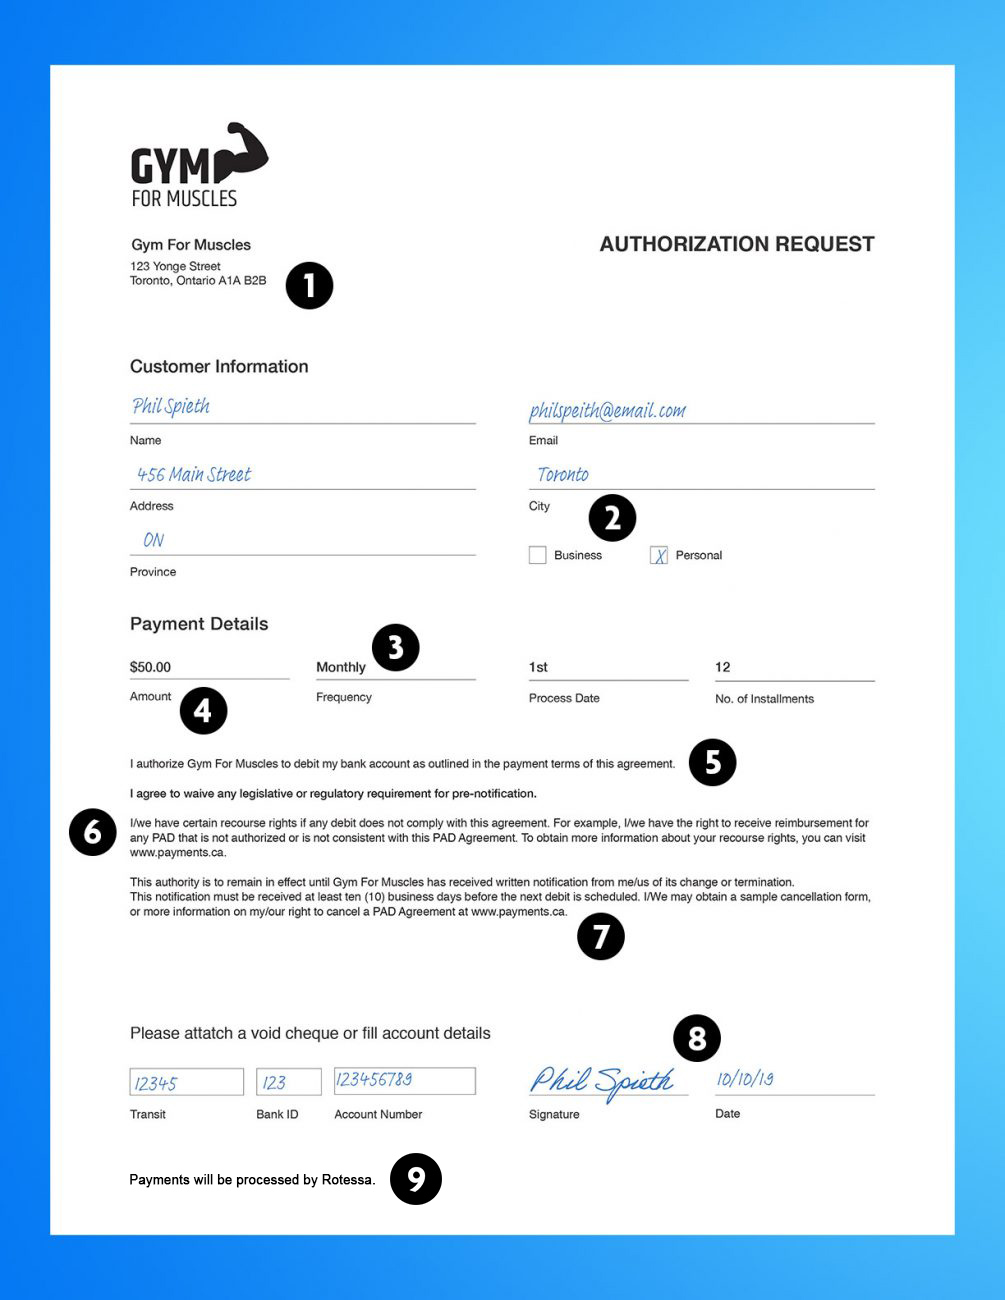 Pe authorized debit form components. All the parts of an authorization request.